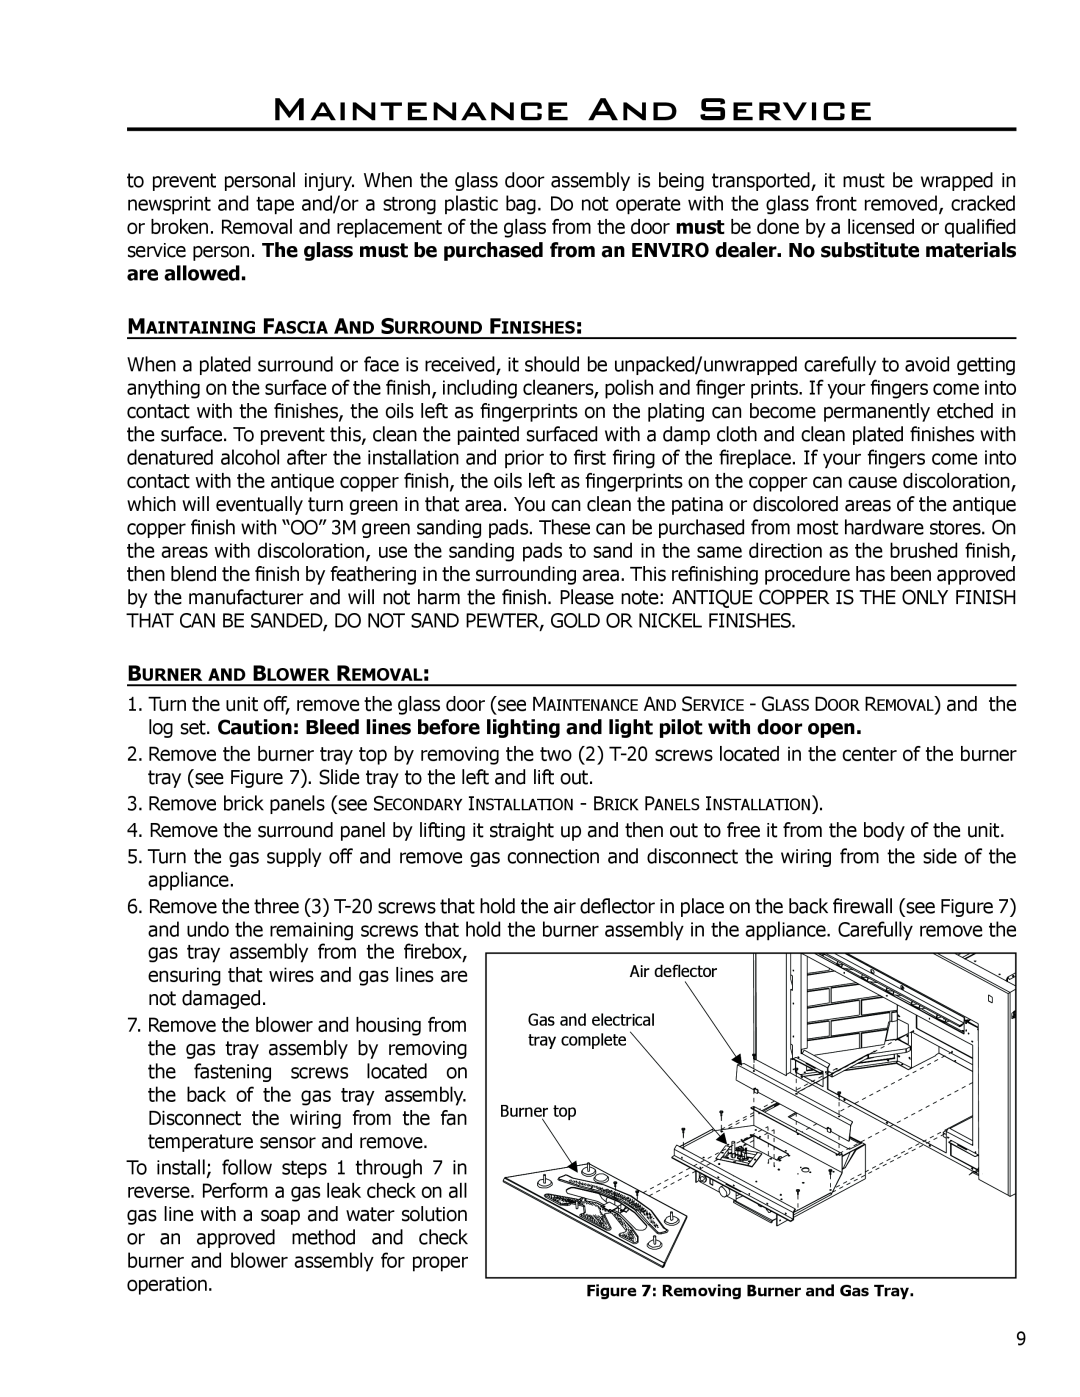 Enviro C-11288 owner manual Maintenance And Service, gas tray assembly from the firebox 